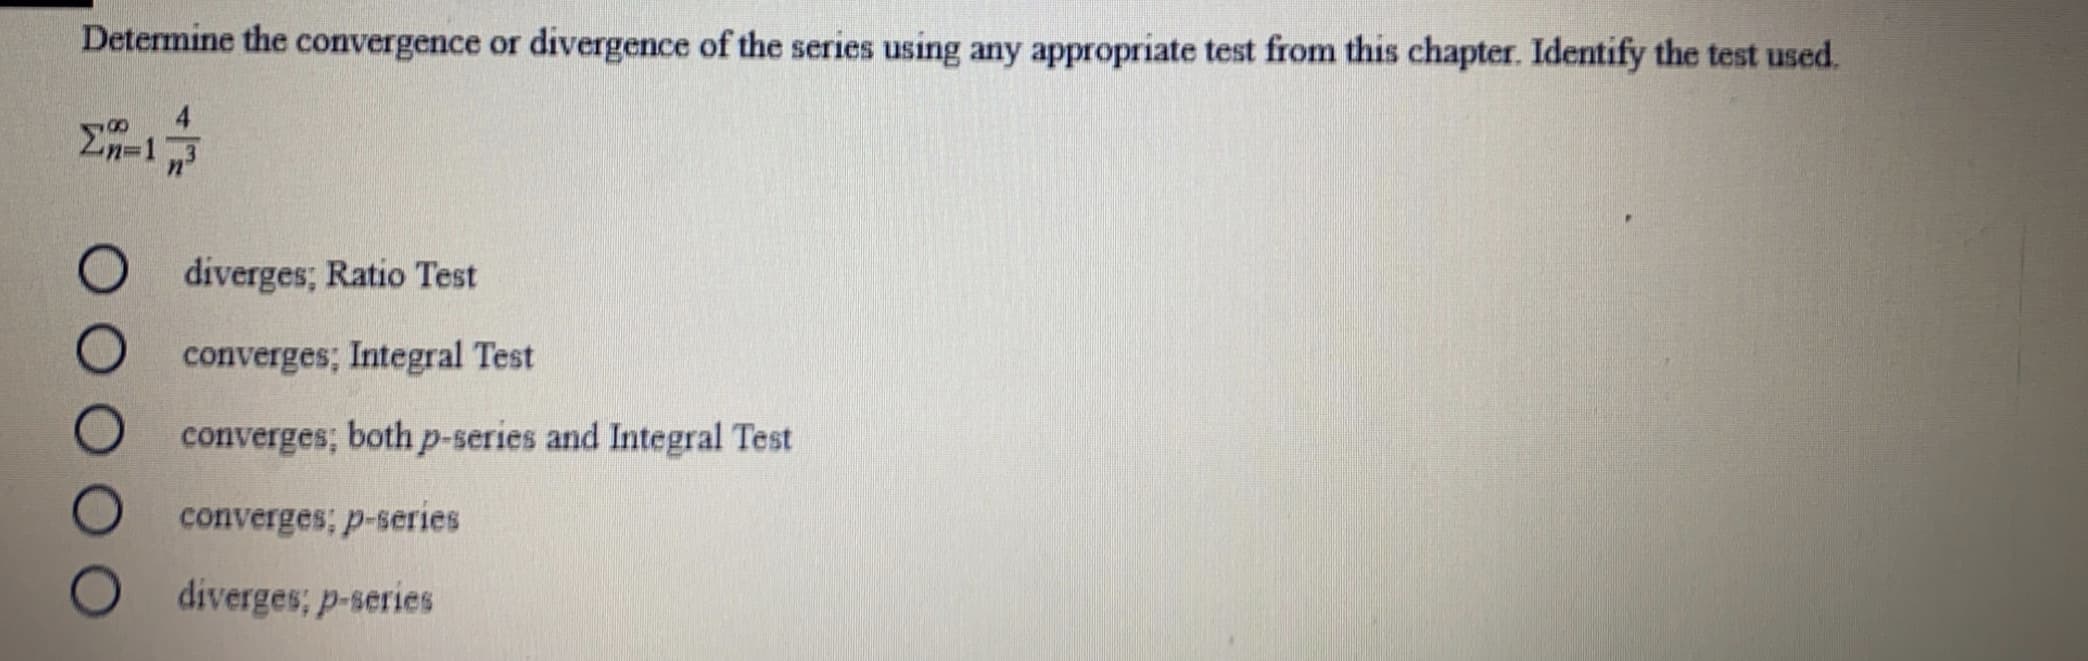 Determine the convergence or divergence of the series using any appropriate test from this chapter. Identify the test used.
4
diverges; Ratio Test
converges; Integral Test
converges; both p-series and Integral Test
converges; p-series
diverges; p-series
